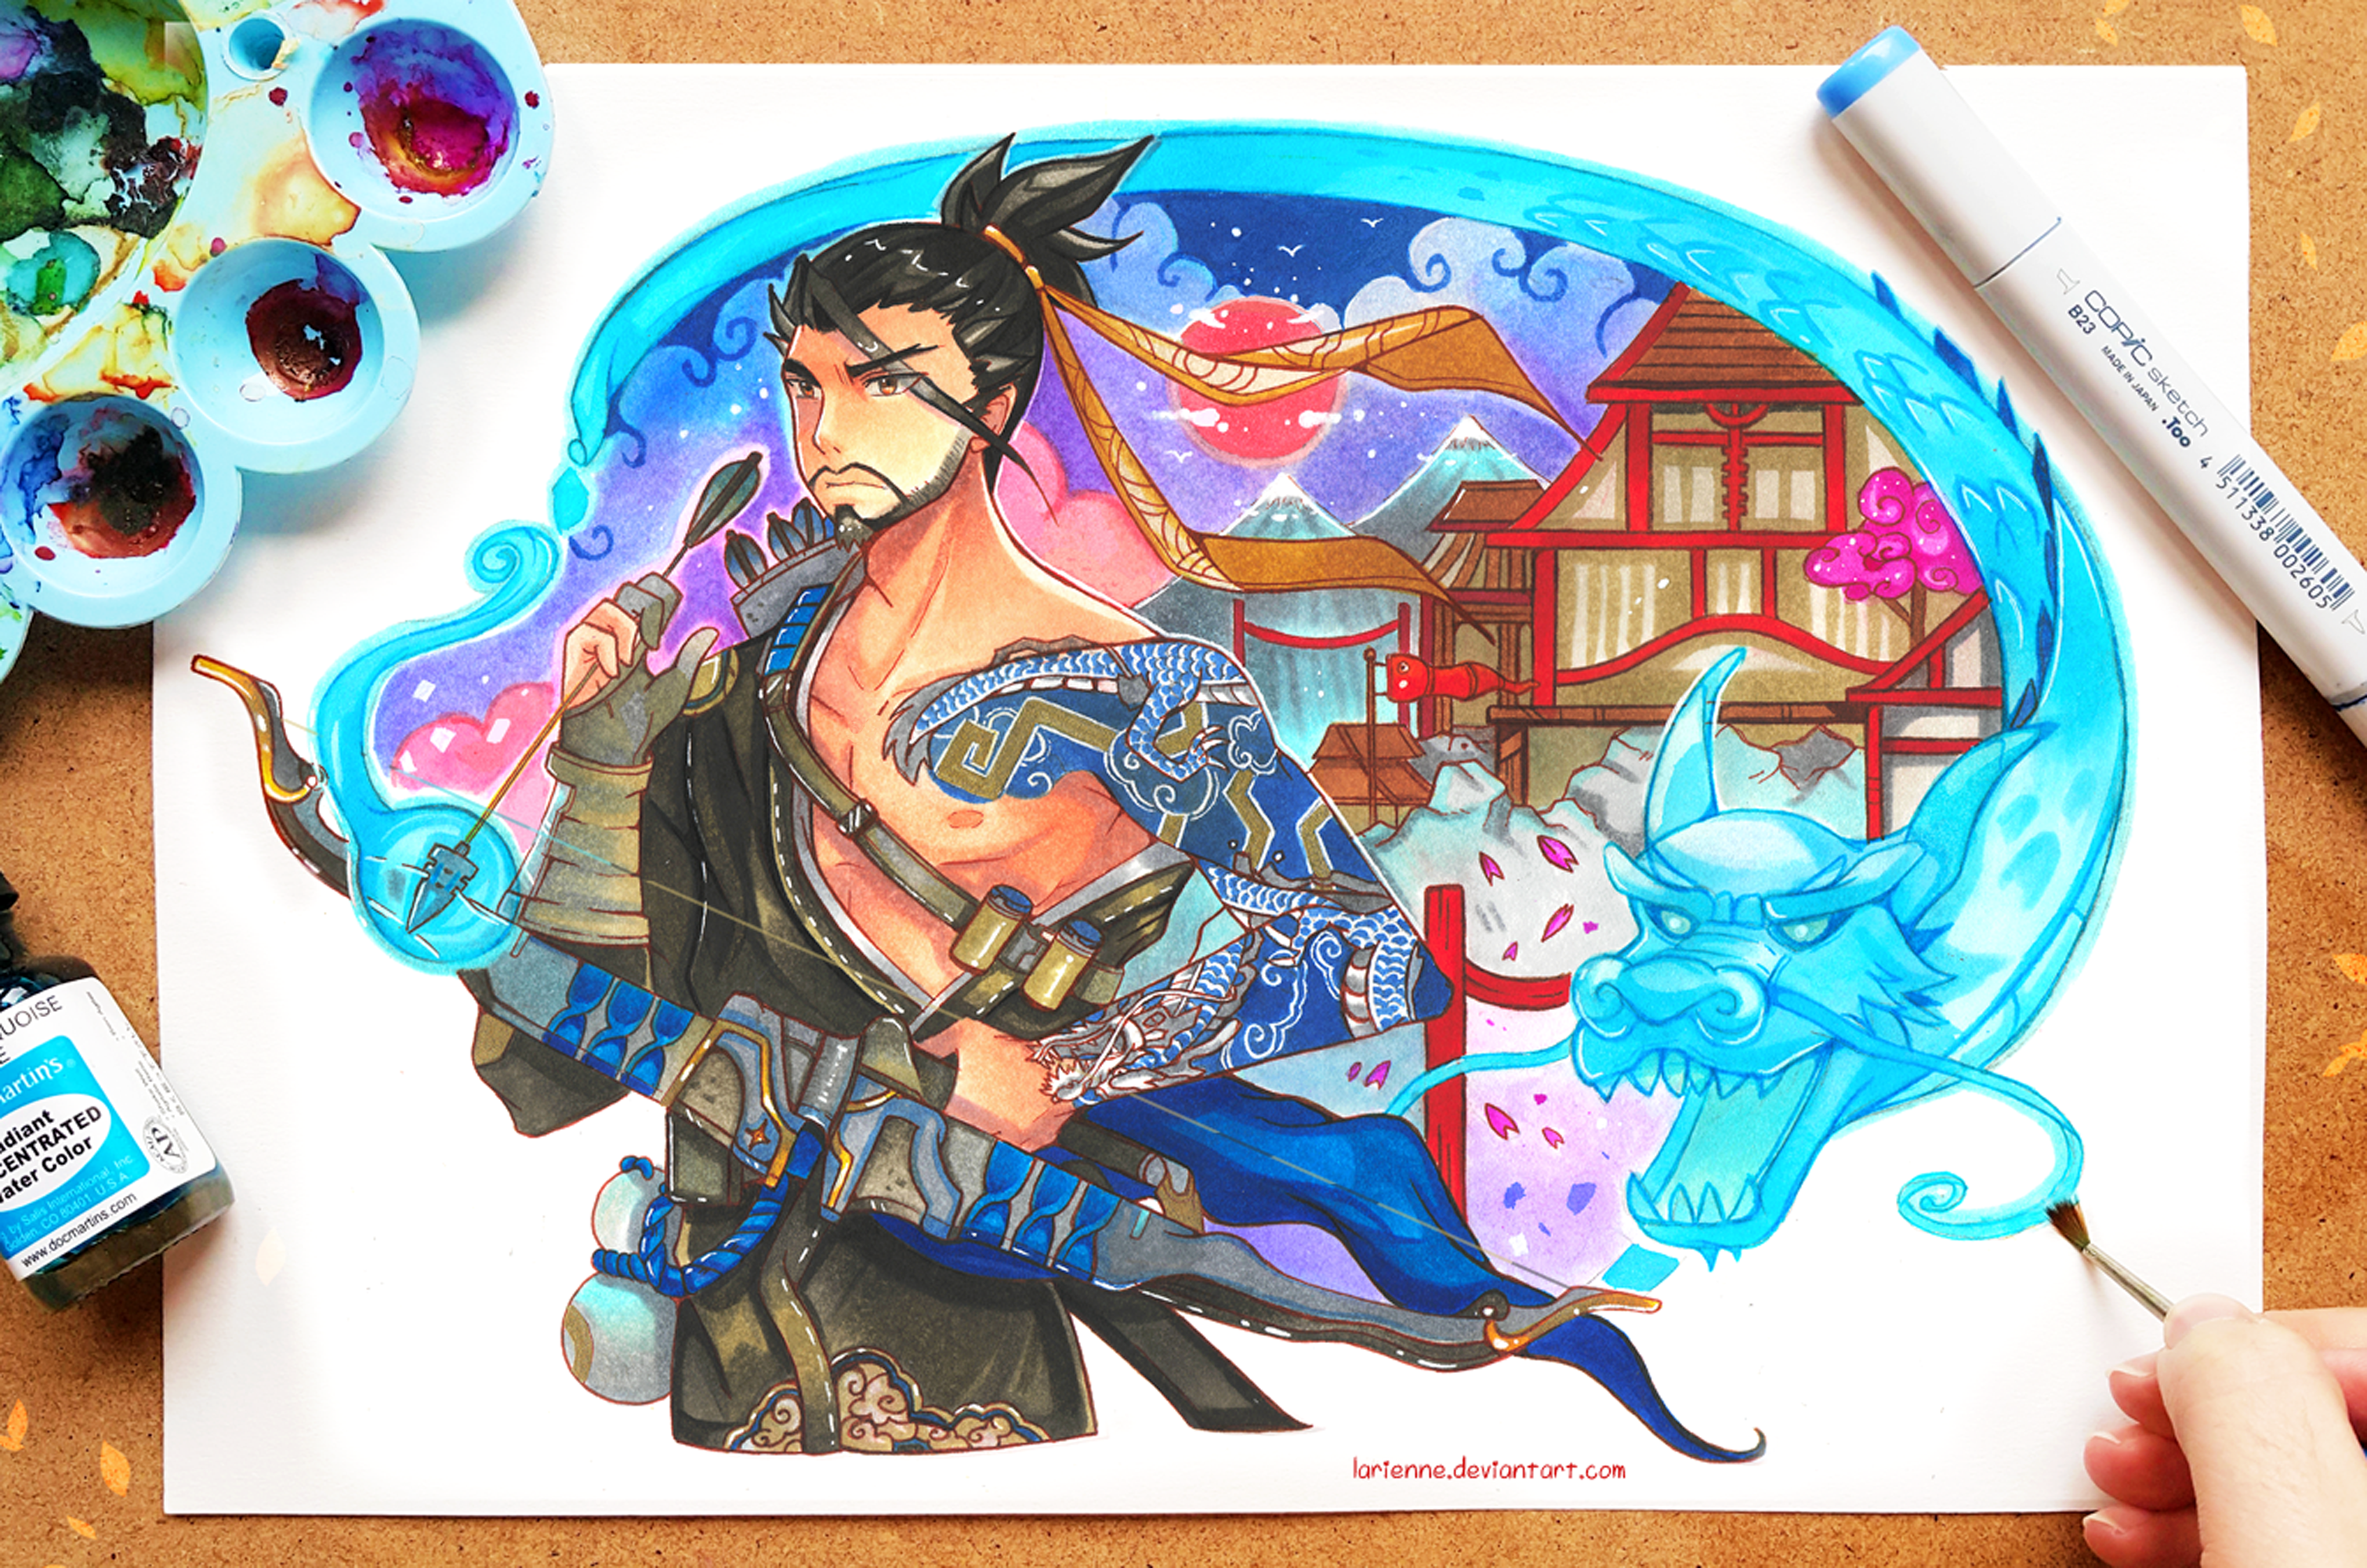 Hanzo on paper by larienne